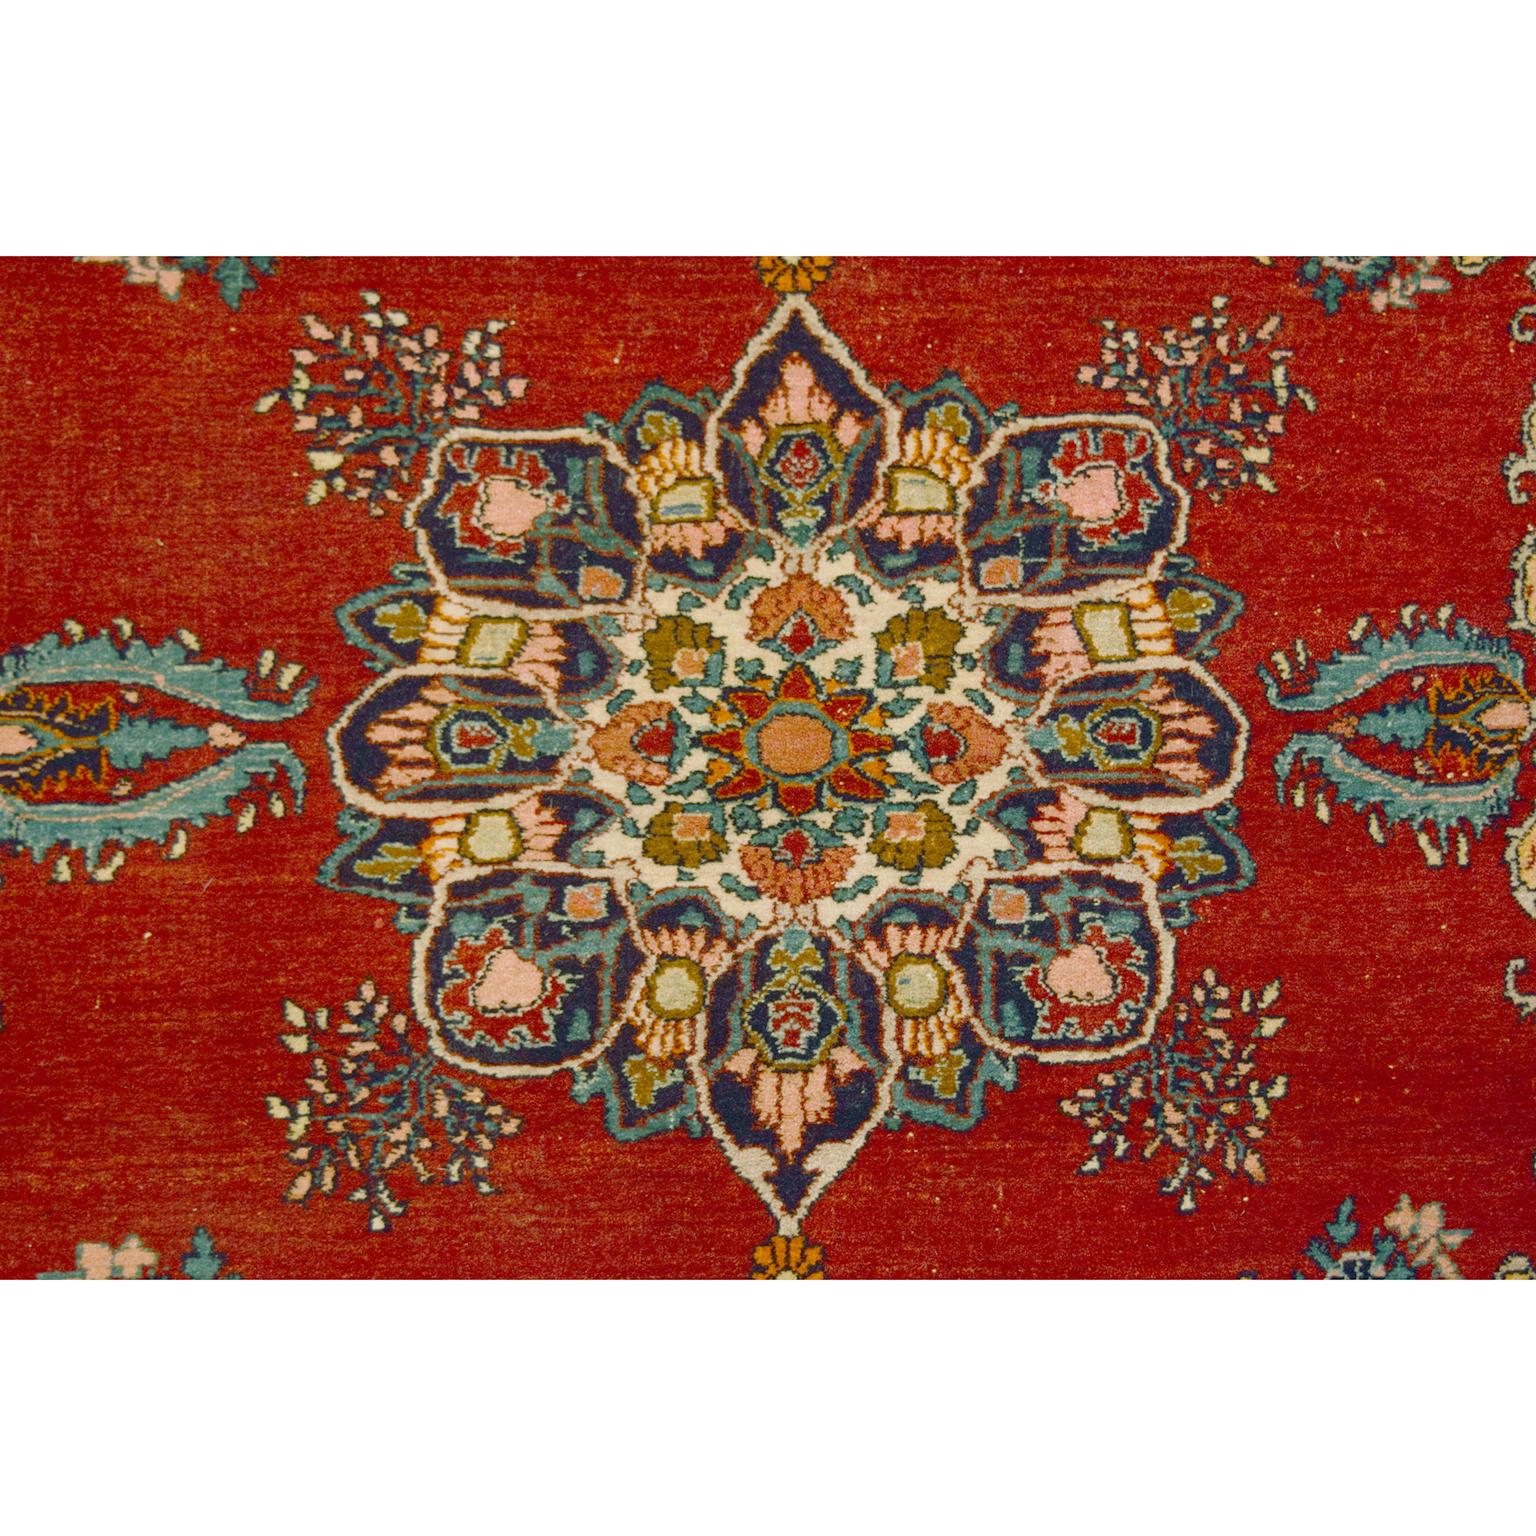 This formal antique Persian Bidjar carpet in red with accents of blue and gold measures approximately 4' x 6'. To craft this carpet, the weaver utilized traditional Persian handknotting weaving technique. These practices create a luxurious pile and